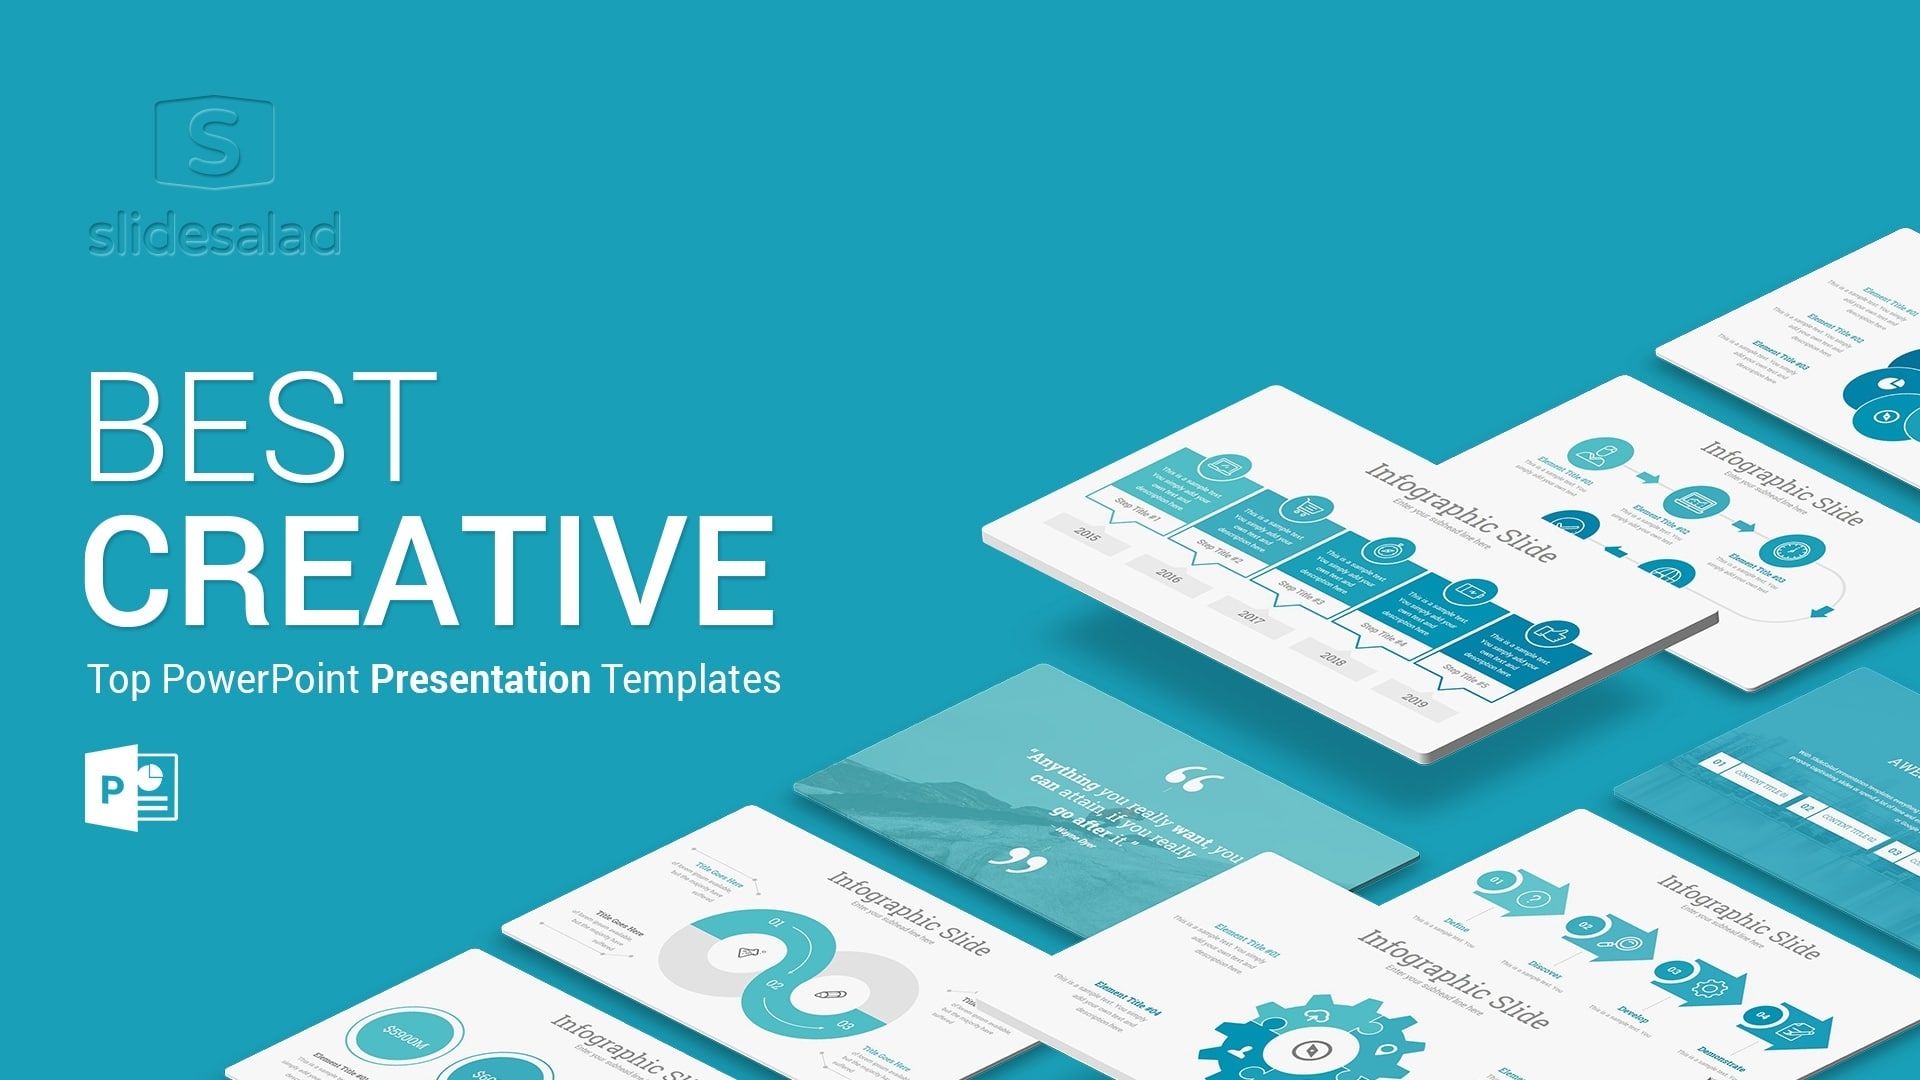 40+ Beautiful Powerpoint (Ppt) Presentation Templates For 2021 – Slidesalad Within Powerpoint Photo Slideshow Template